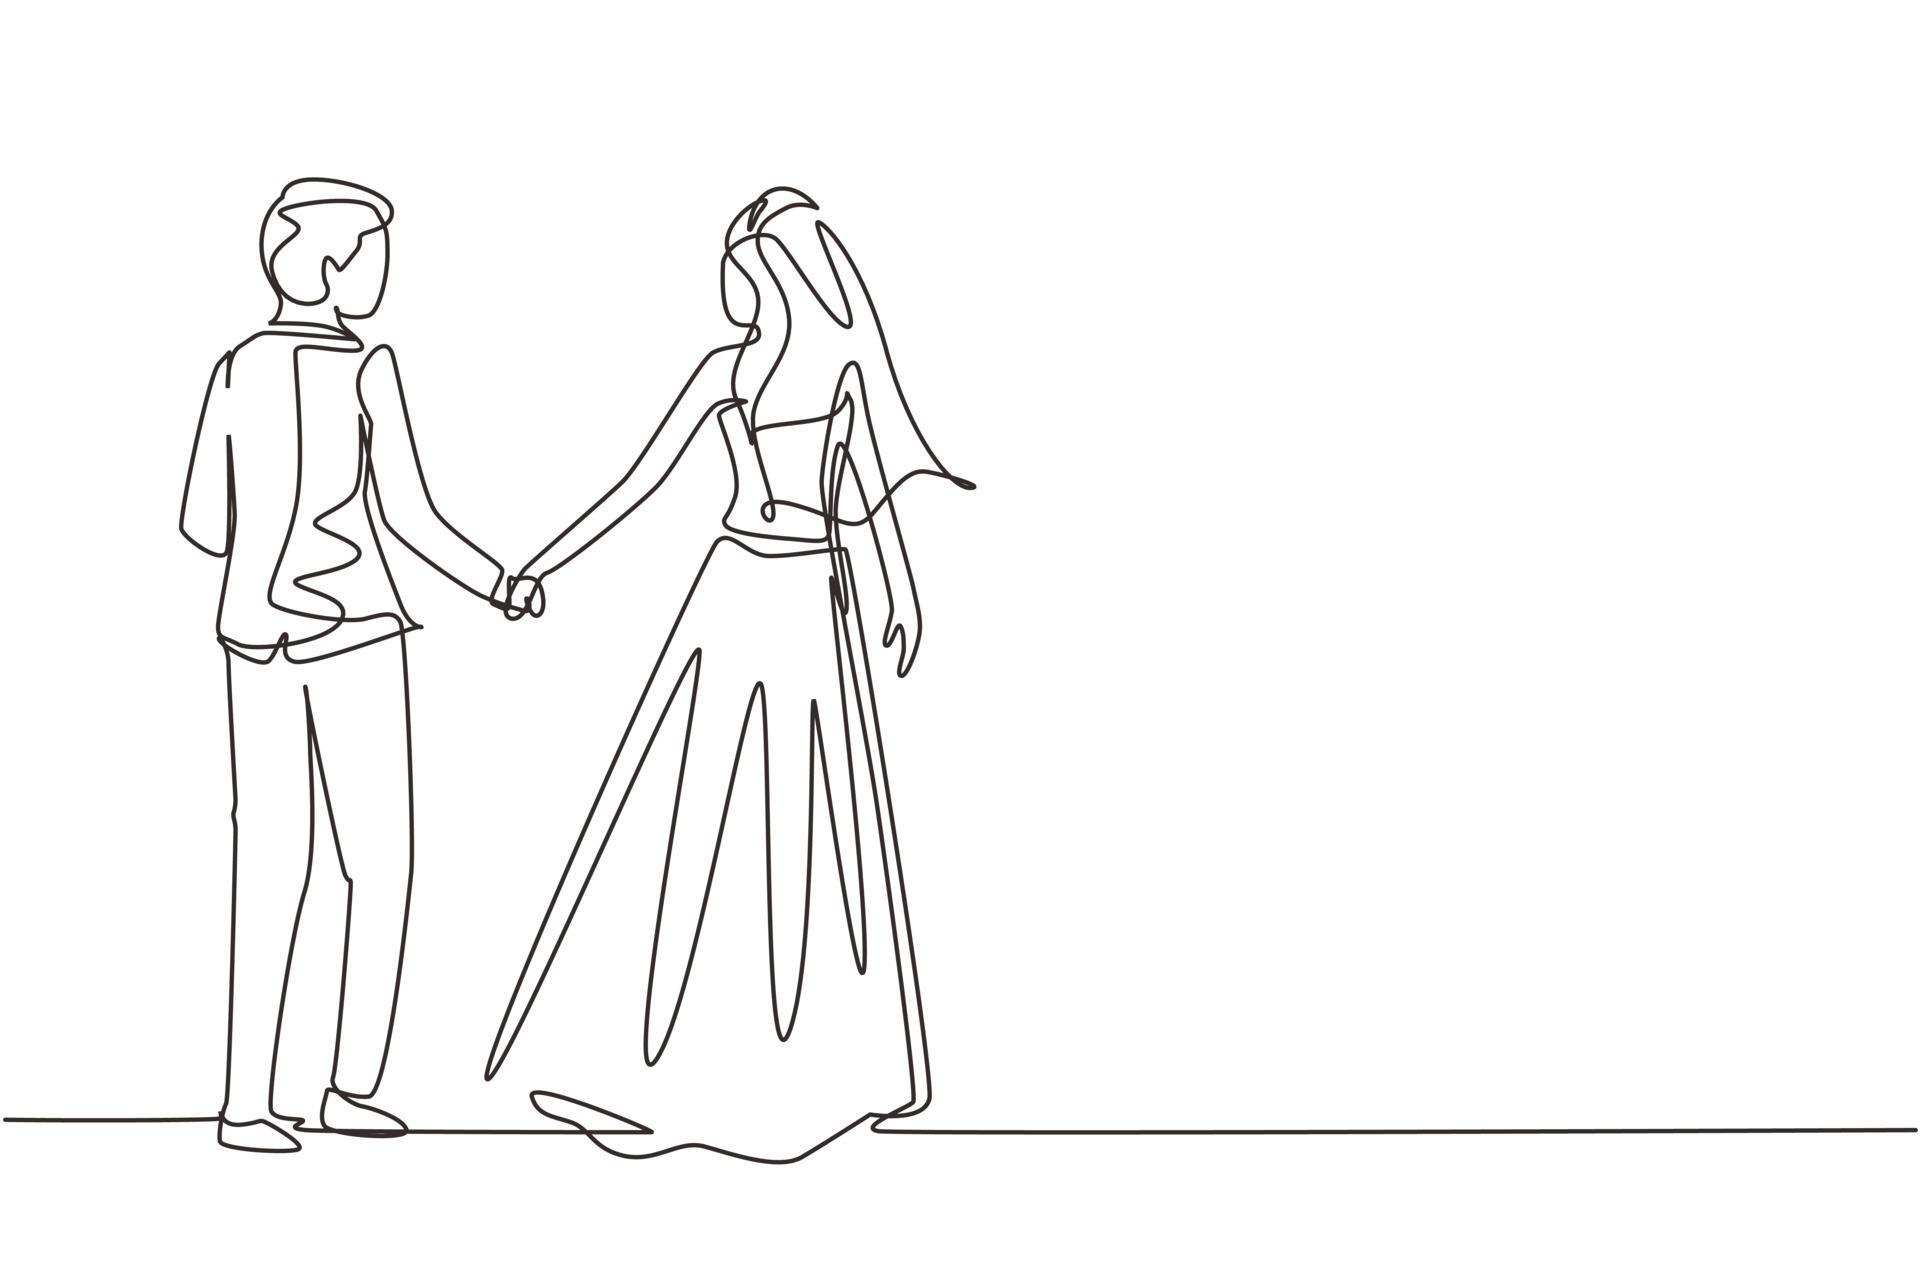 Single one line drawing romantic married couple in love hand in hand. Man  wearing suit and woman with wedding dress in love spending time together at  park. Continuous line draw design graphic